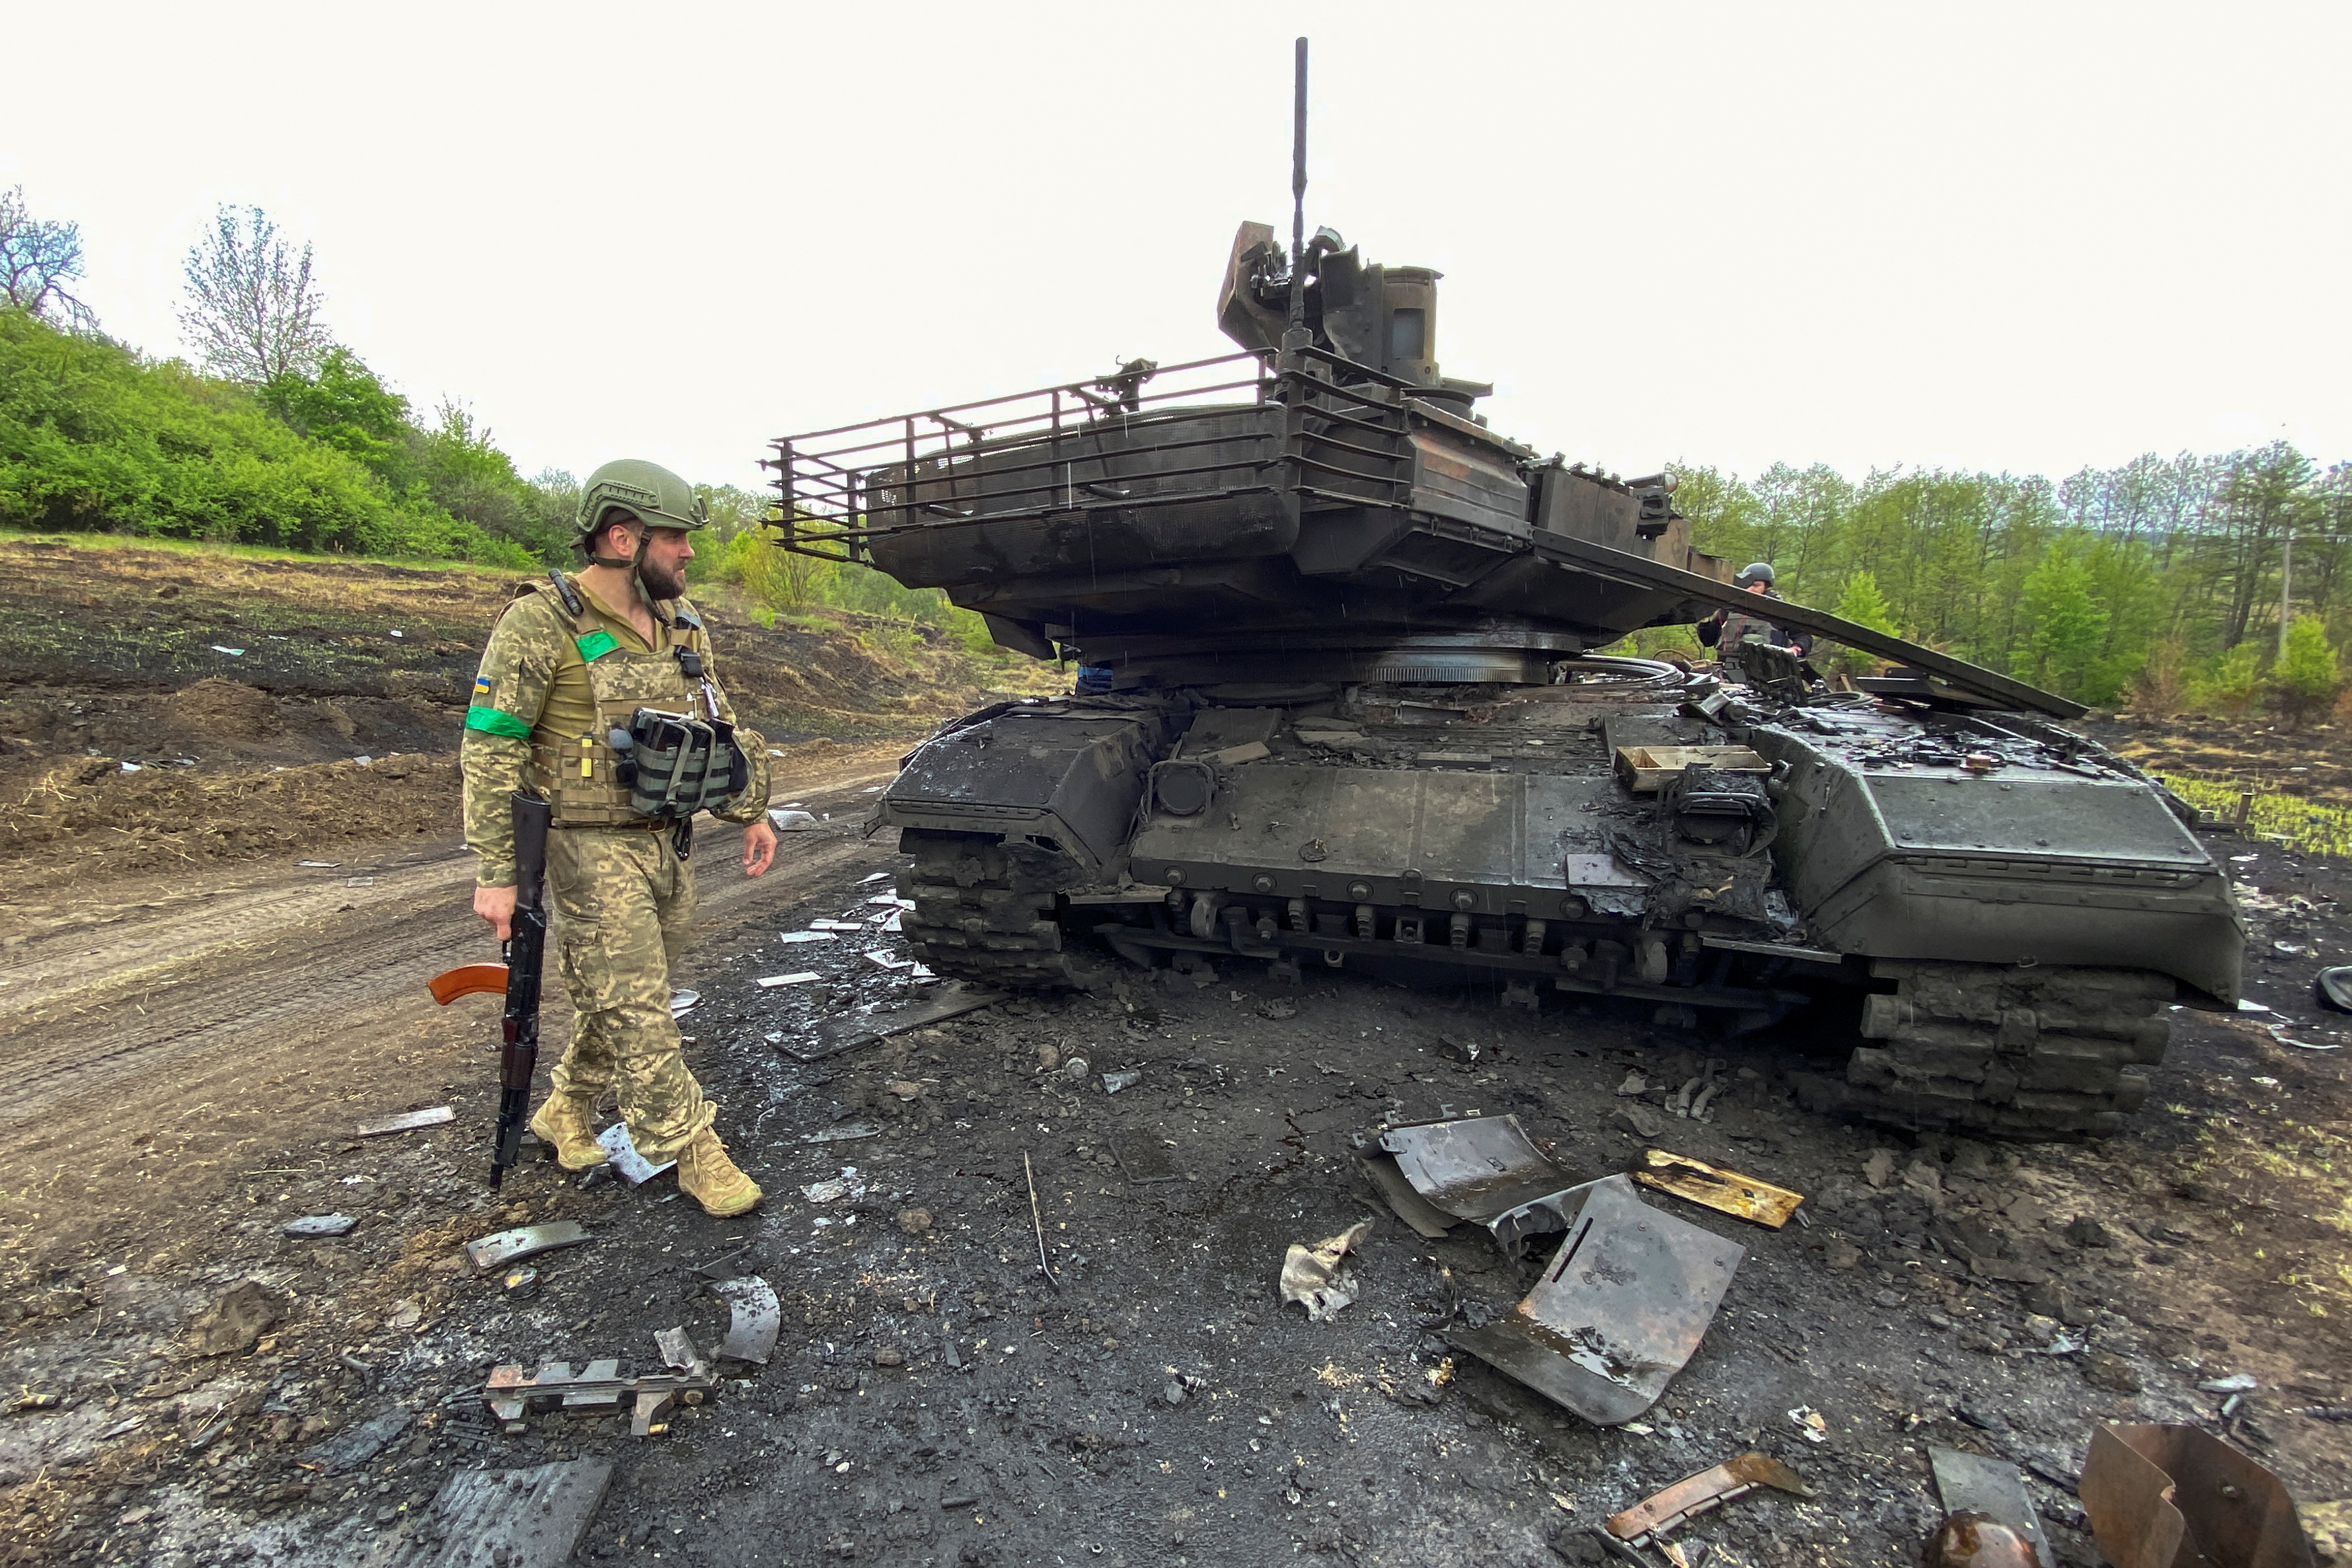 Ukrainian serviceman walks next to a destroyed Russian main battle tank T-90M Proryv, as Russia's attack on Ukraine continues, near the village of Staryi Saltiv in Kharkiv region, Ukraine May 9, 2022. Picture taken May 9, 2022. REUTERS/Vitalii Hnidyi